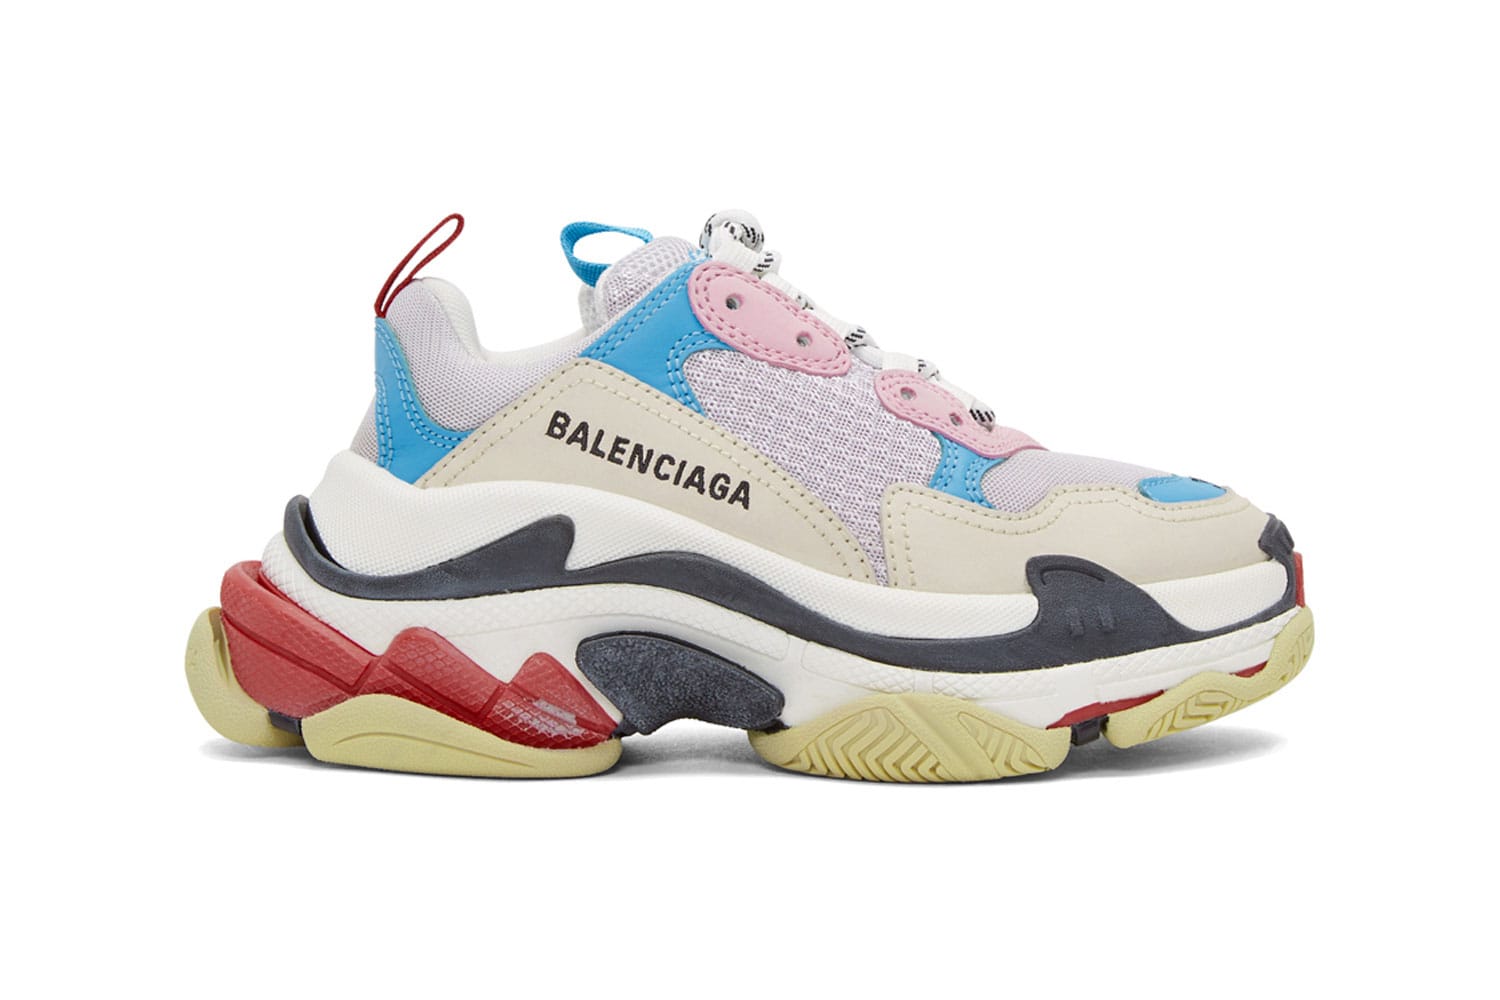 9 Reasons to NOT to Buy Balenciaga Triple S Trainers Dec